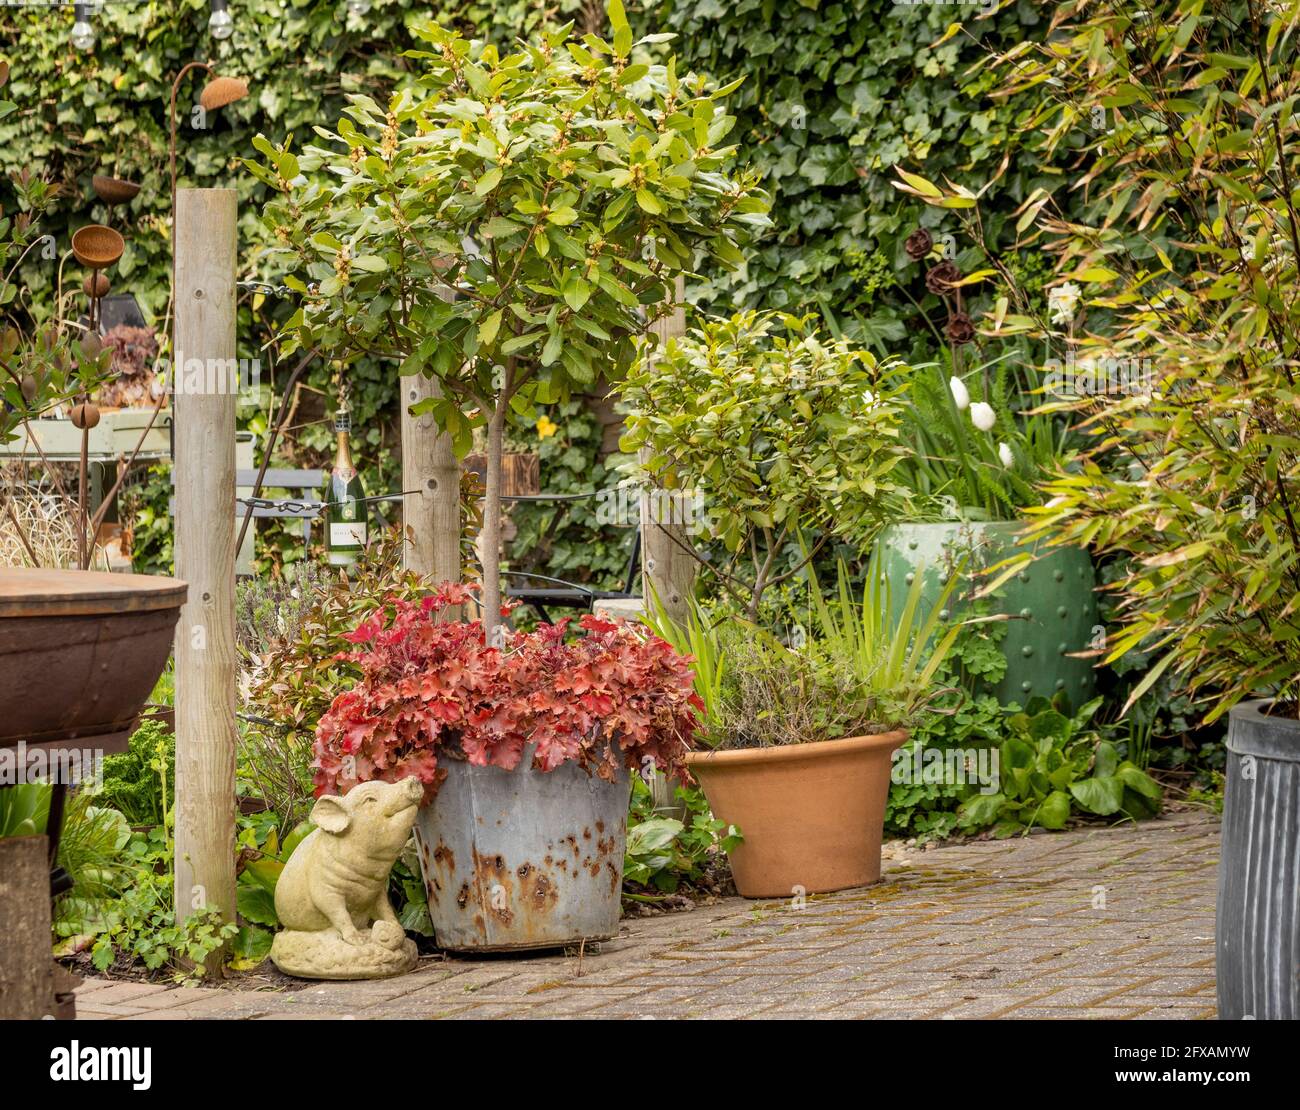 Small garden with an assortment of metal, terracotta and ceramic containers with various plants in them. UK. Stock Photo